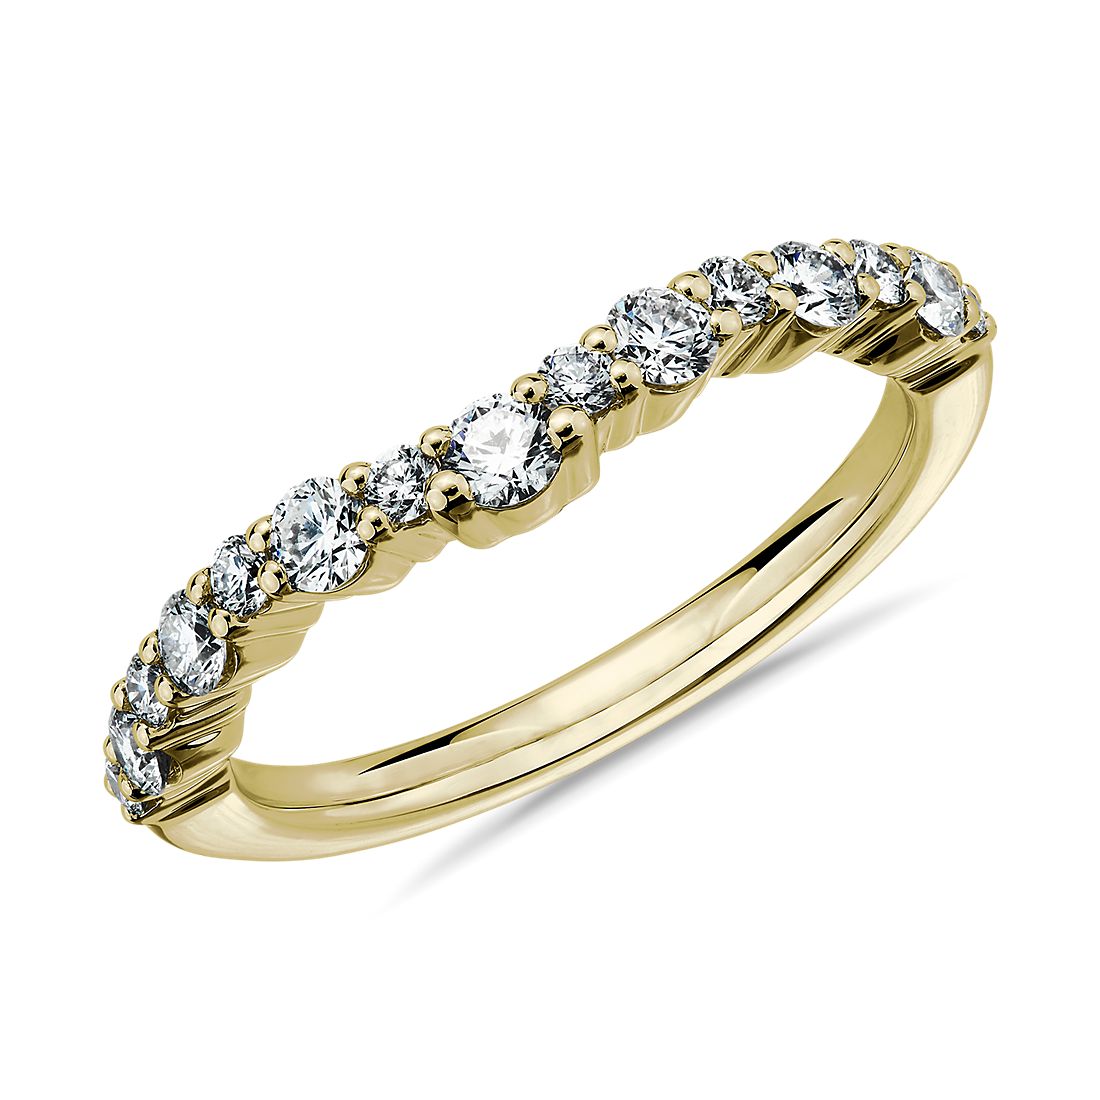 Crescendo Curved Diamond Wedding Ring in 14k Yellow Gold (1/2 ct. tw.)